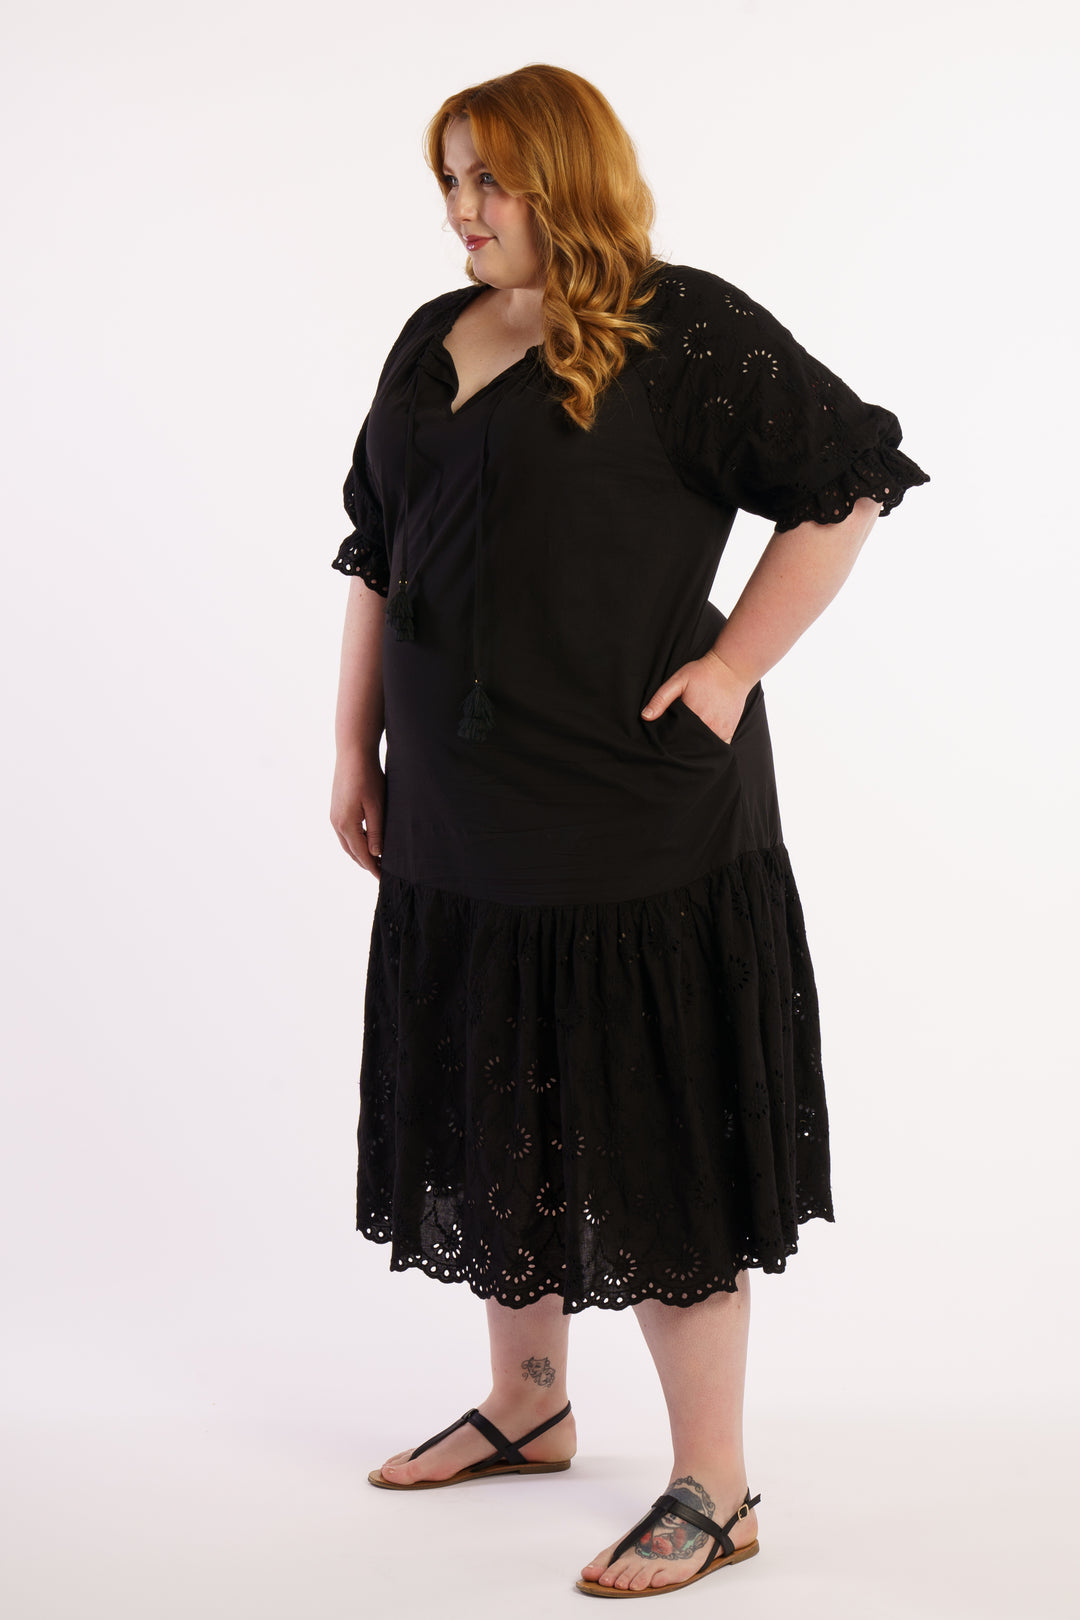 Summer Breeze Broidery Dress - Black - STOCK AVAILABLE -  S (14/16)